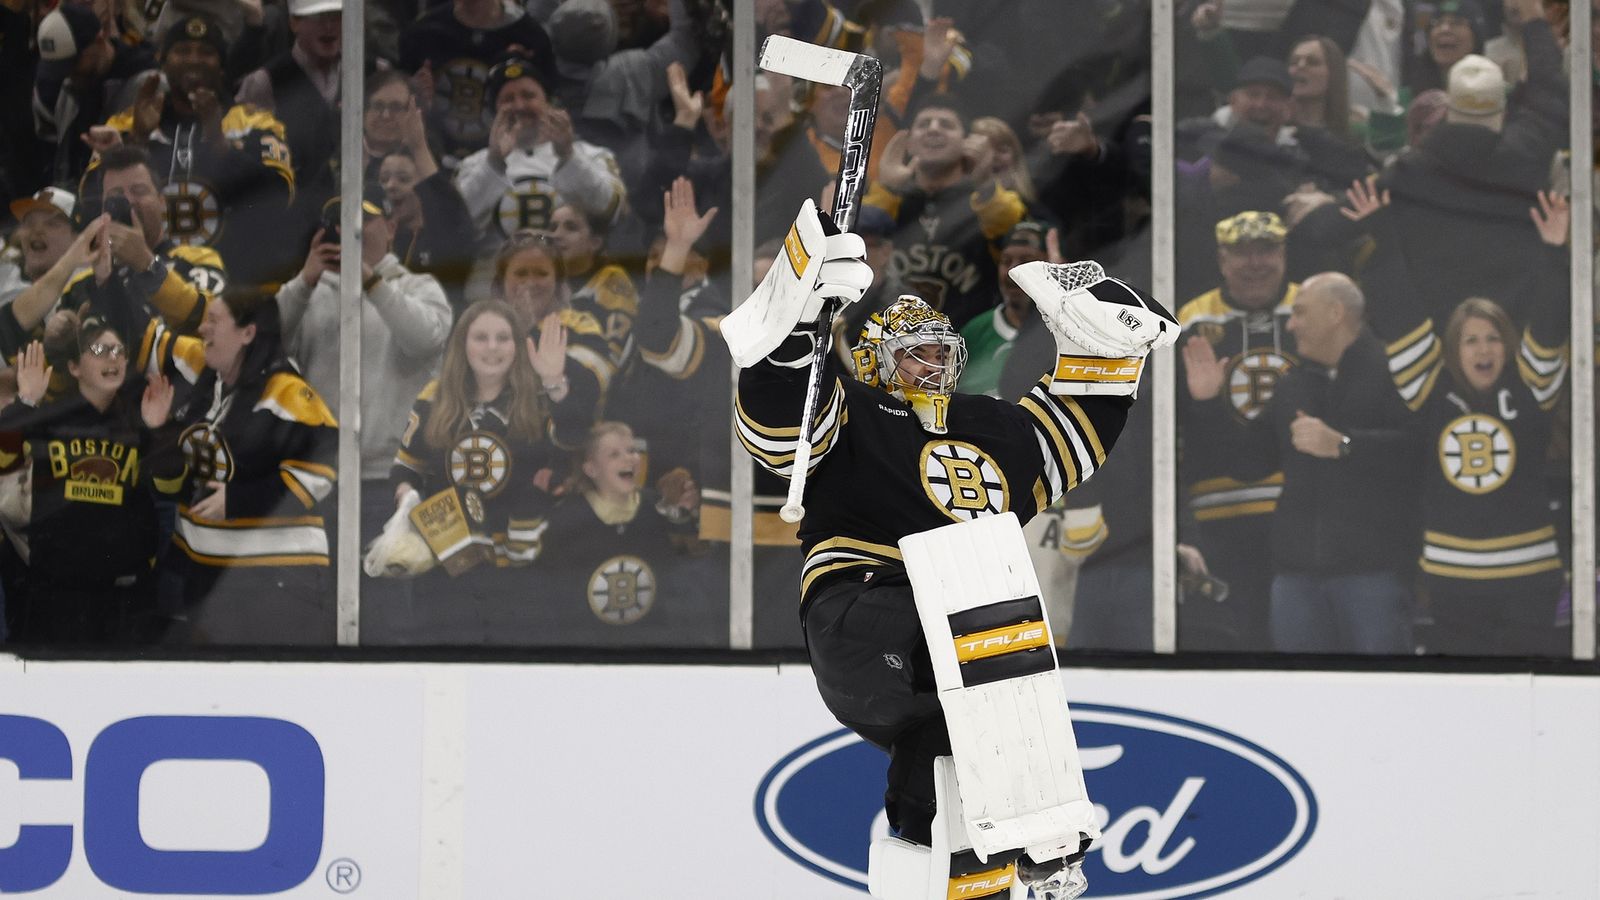 A large gap remains between Bruins and Jeremy Swayman